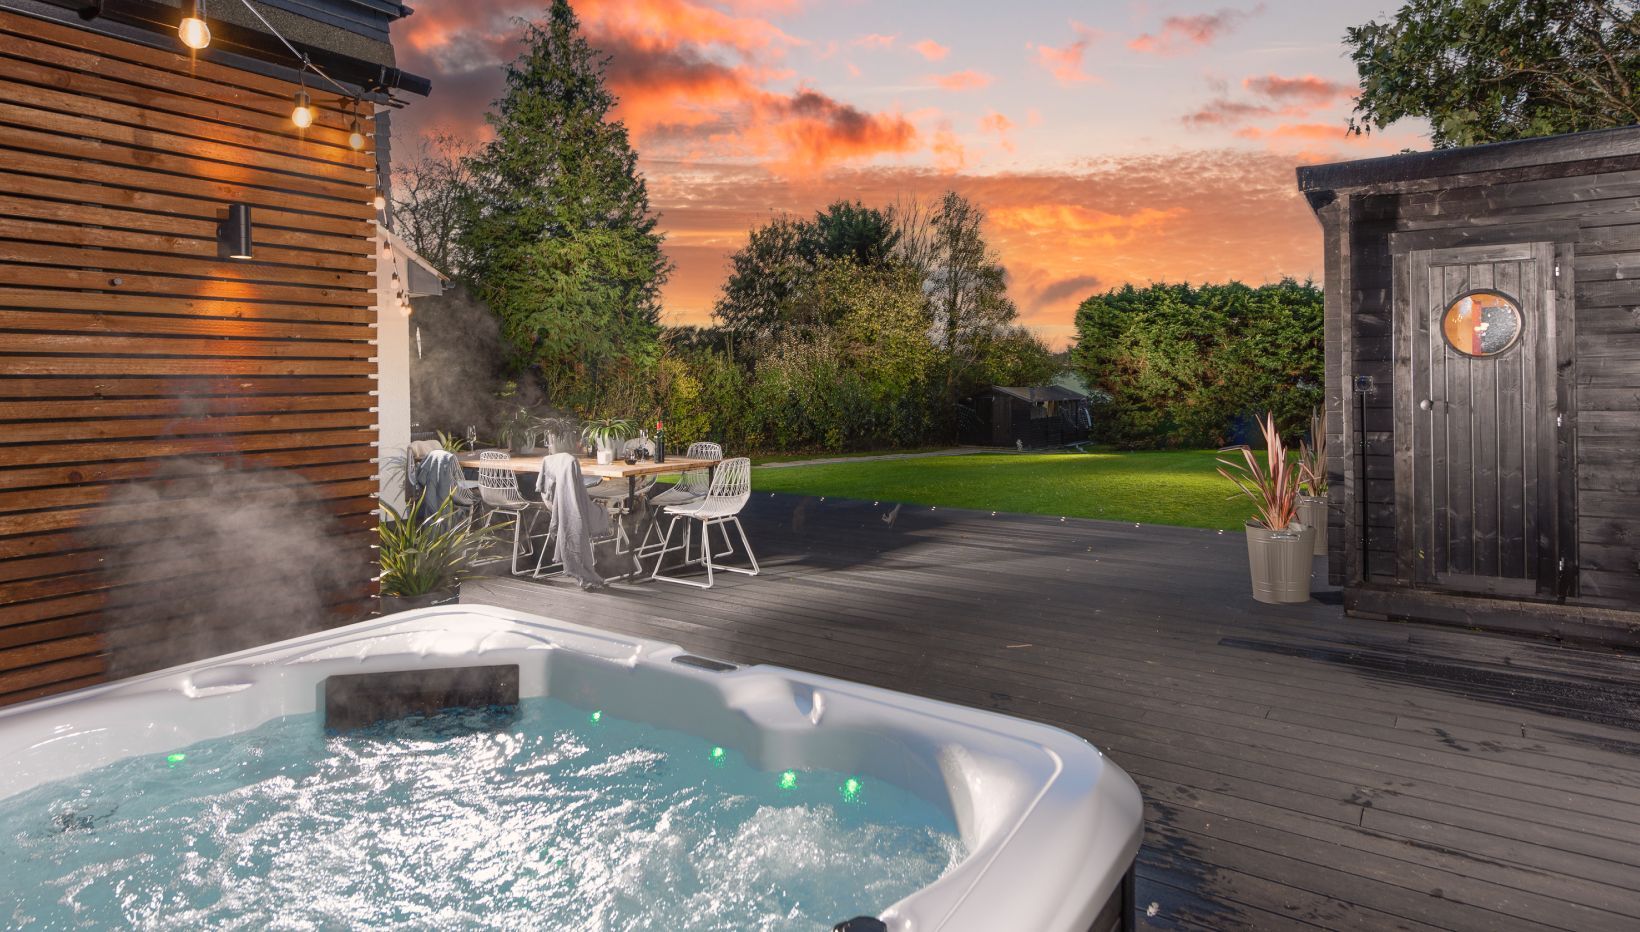 A garden with a hot tub at sunset